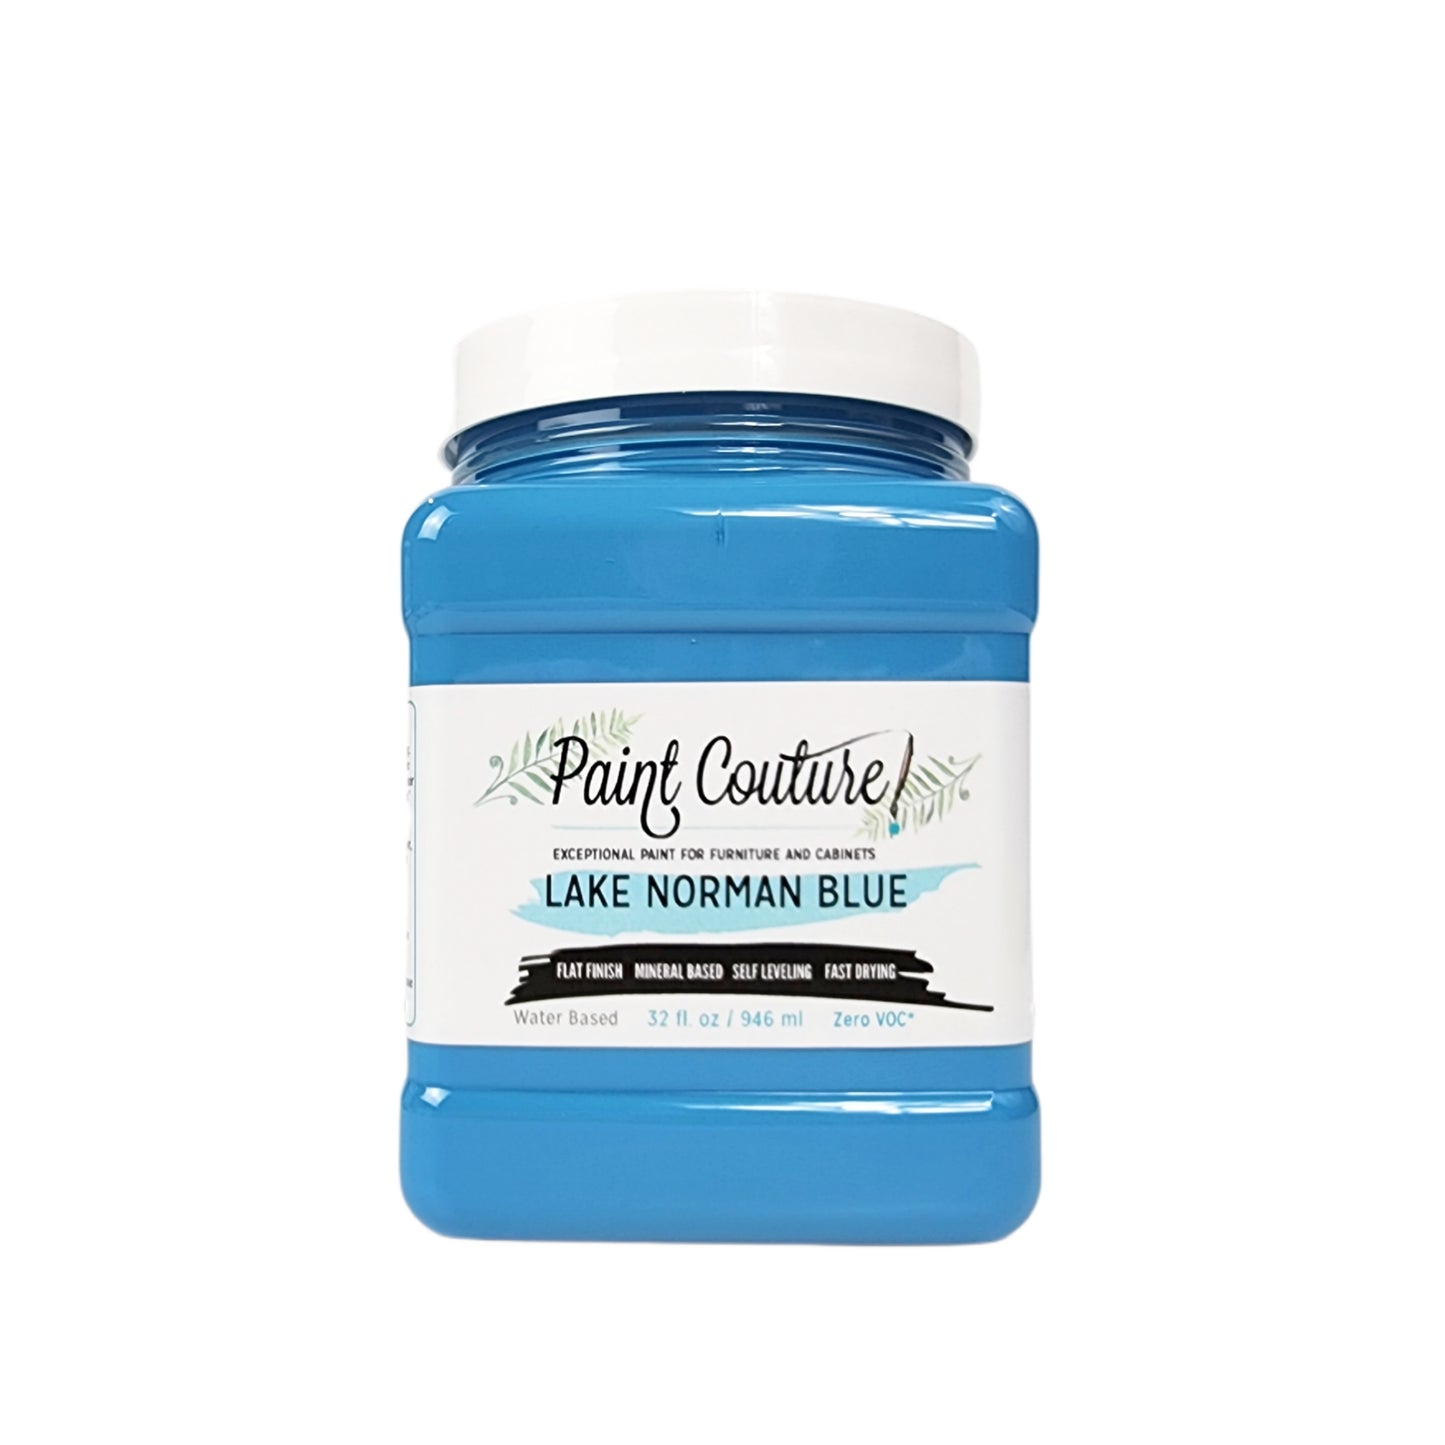 Paint Couture Lake Norman Blue